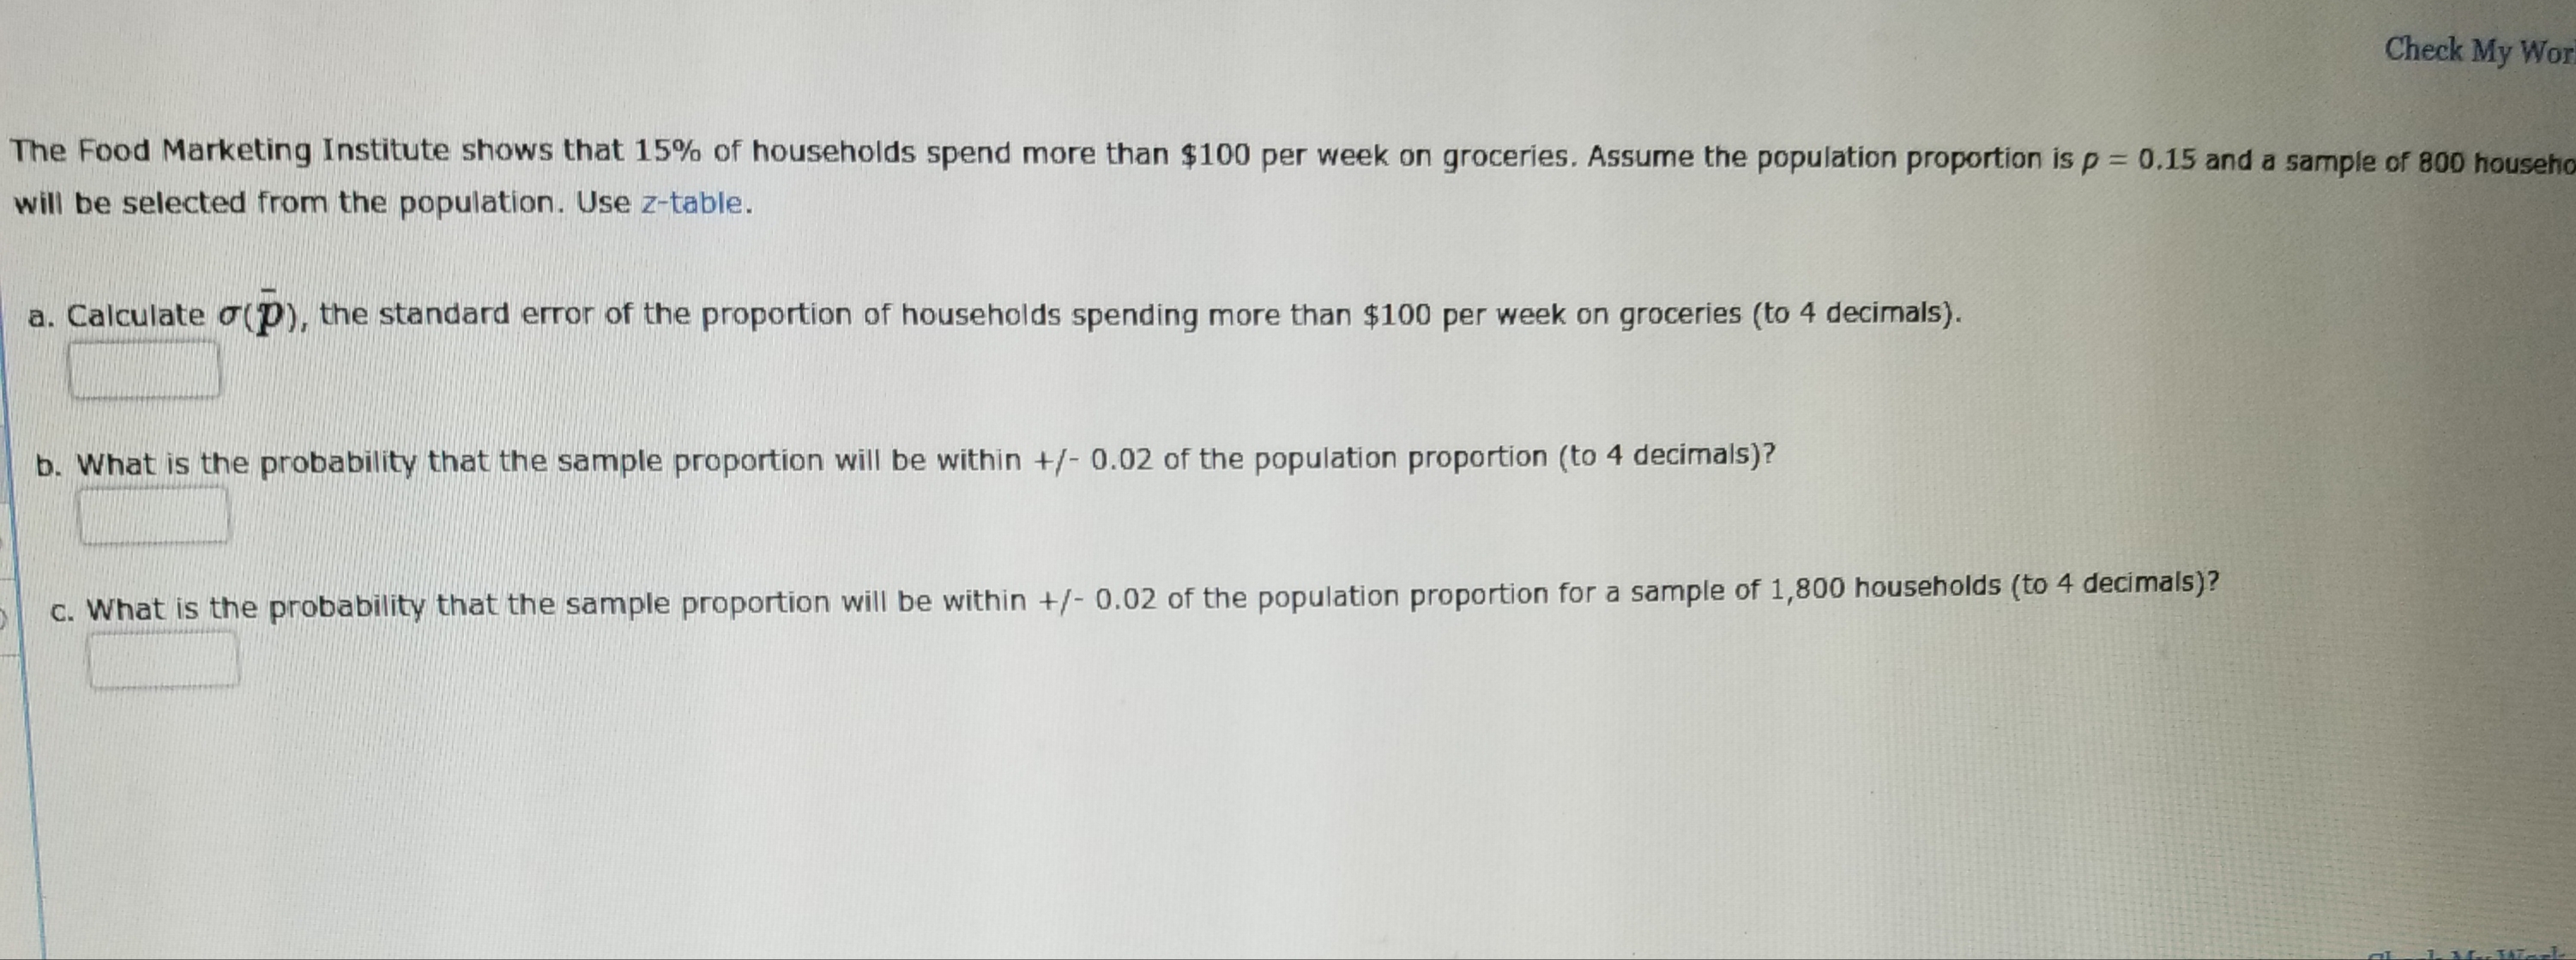 Check My Wor
The Food Marketing Institute shows that 15% of households spend more than $100 per week on groceries. Assume the population proportion is p-0.15 and a sample of 800 househo
will be selected from the population. Use z-table.
a. Calculate σ(P), the standard error of the proportion of households spending more than $100 per week on groceries (to 4 decimals).
b. What is the probability that the sample proportion will be within /-0.02 of the population proportion (to 4 decimals)?
c. What is the probability that the sample proportion will be within +/-0.02 of the population proportion for a sample of 1,800 households (to 4 decimals)?
